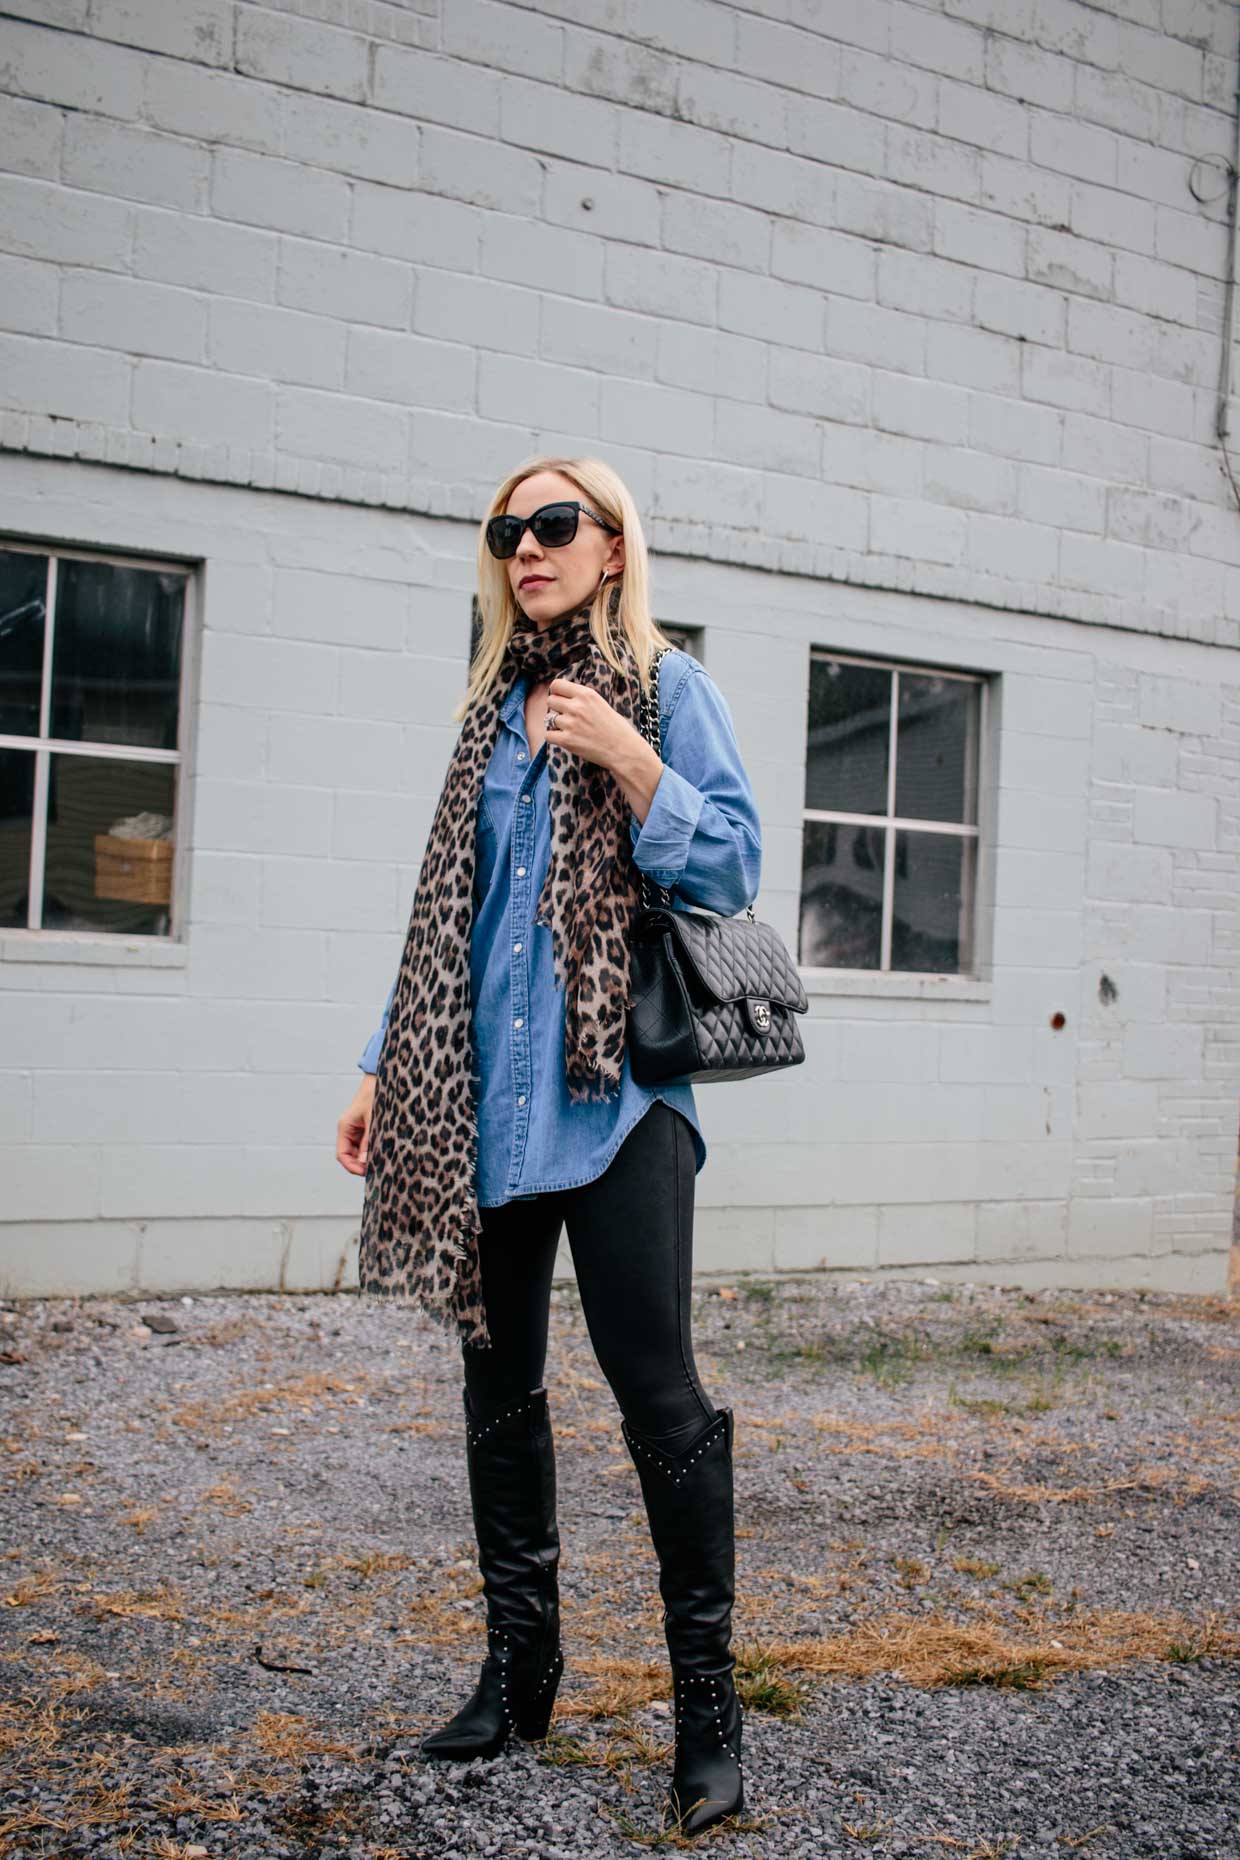 https://www.meagansmoda.com/wp-content/uploads/2019/10/Meagan-Brandon-fashion-blogger-of-Meagans-Moda-shows-how-to-style-Spanx-faux-leather-leggings-with-oversized-long-denim-tunic-shirt-and-leopard-print-scarf.jpg